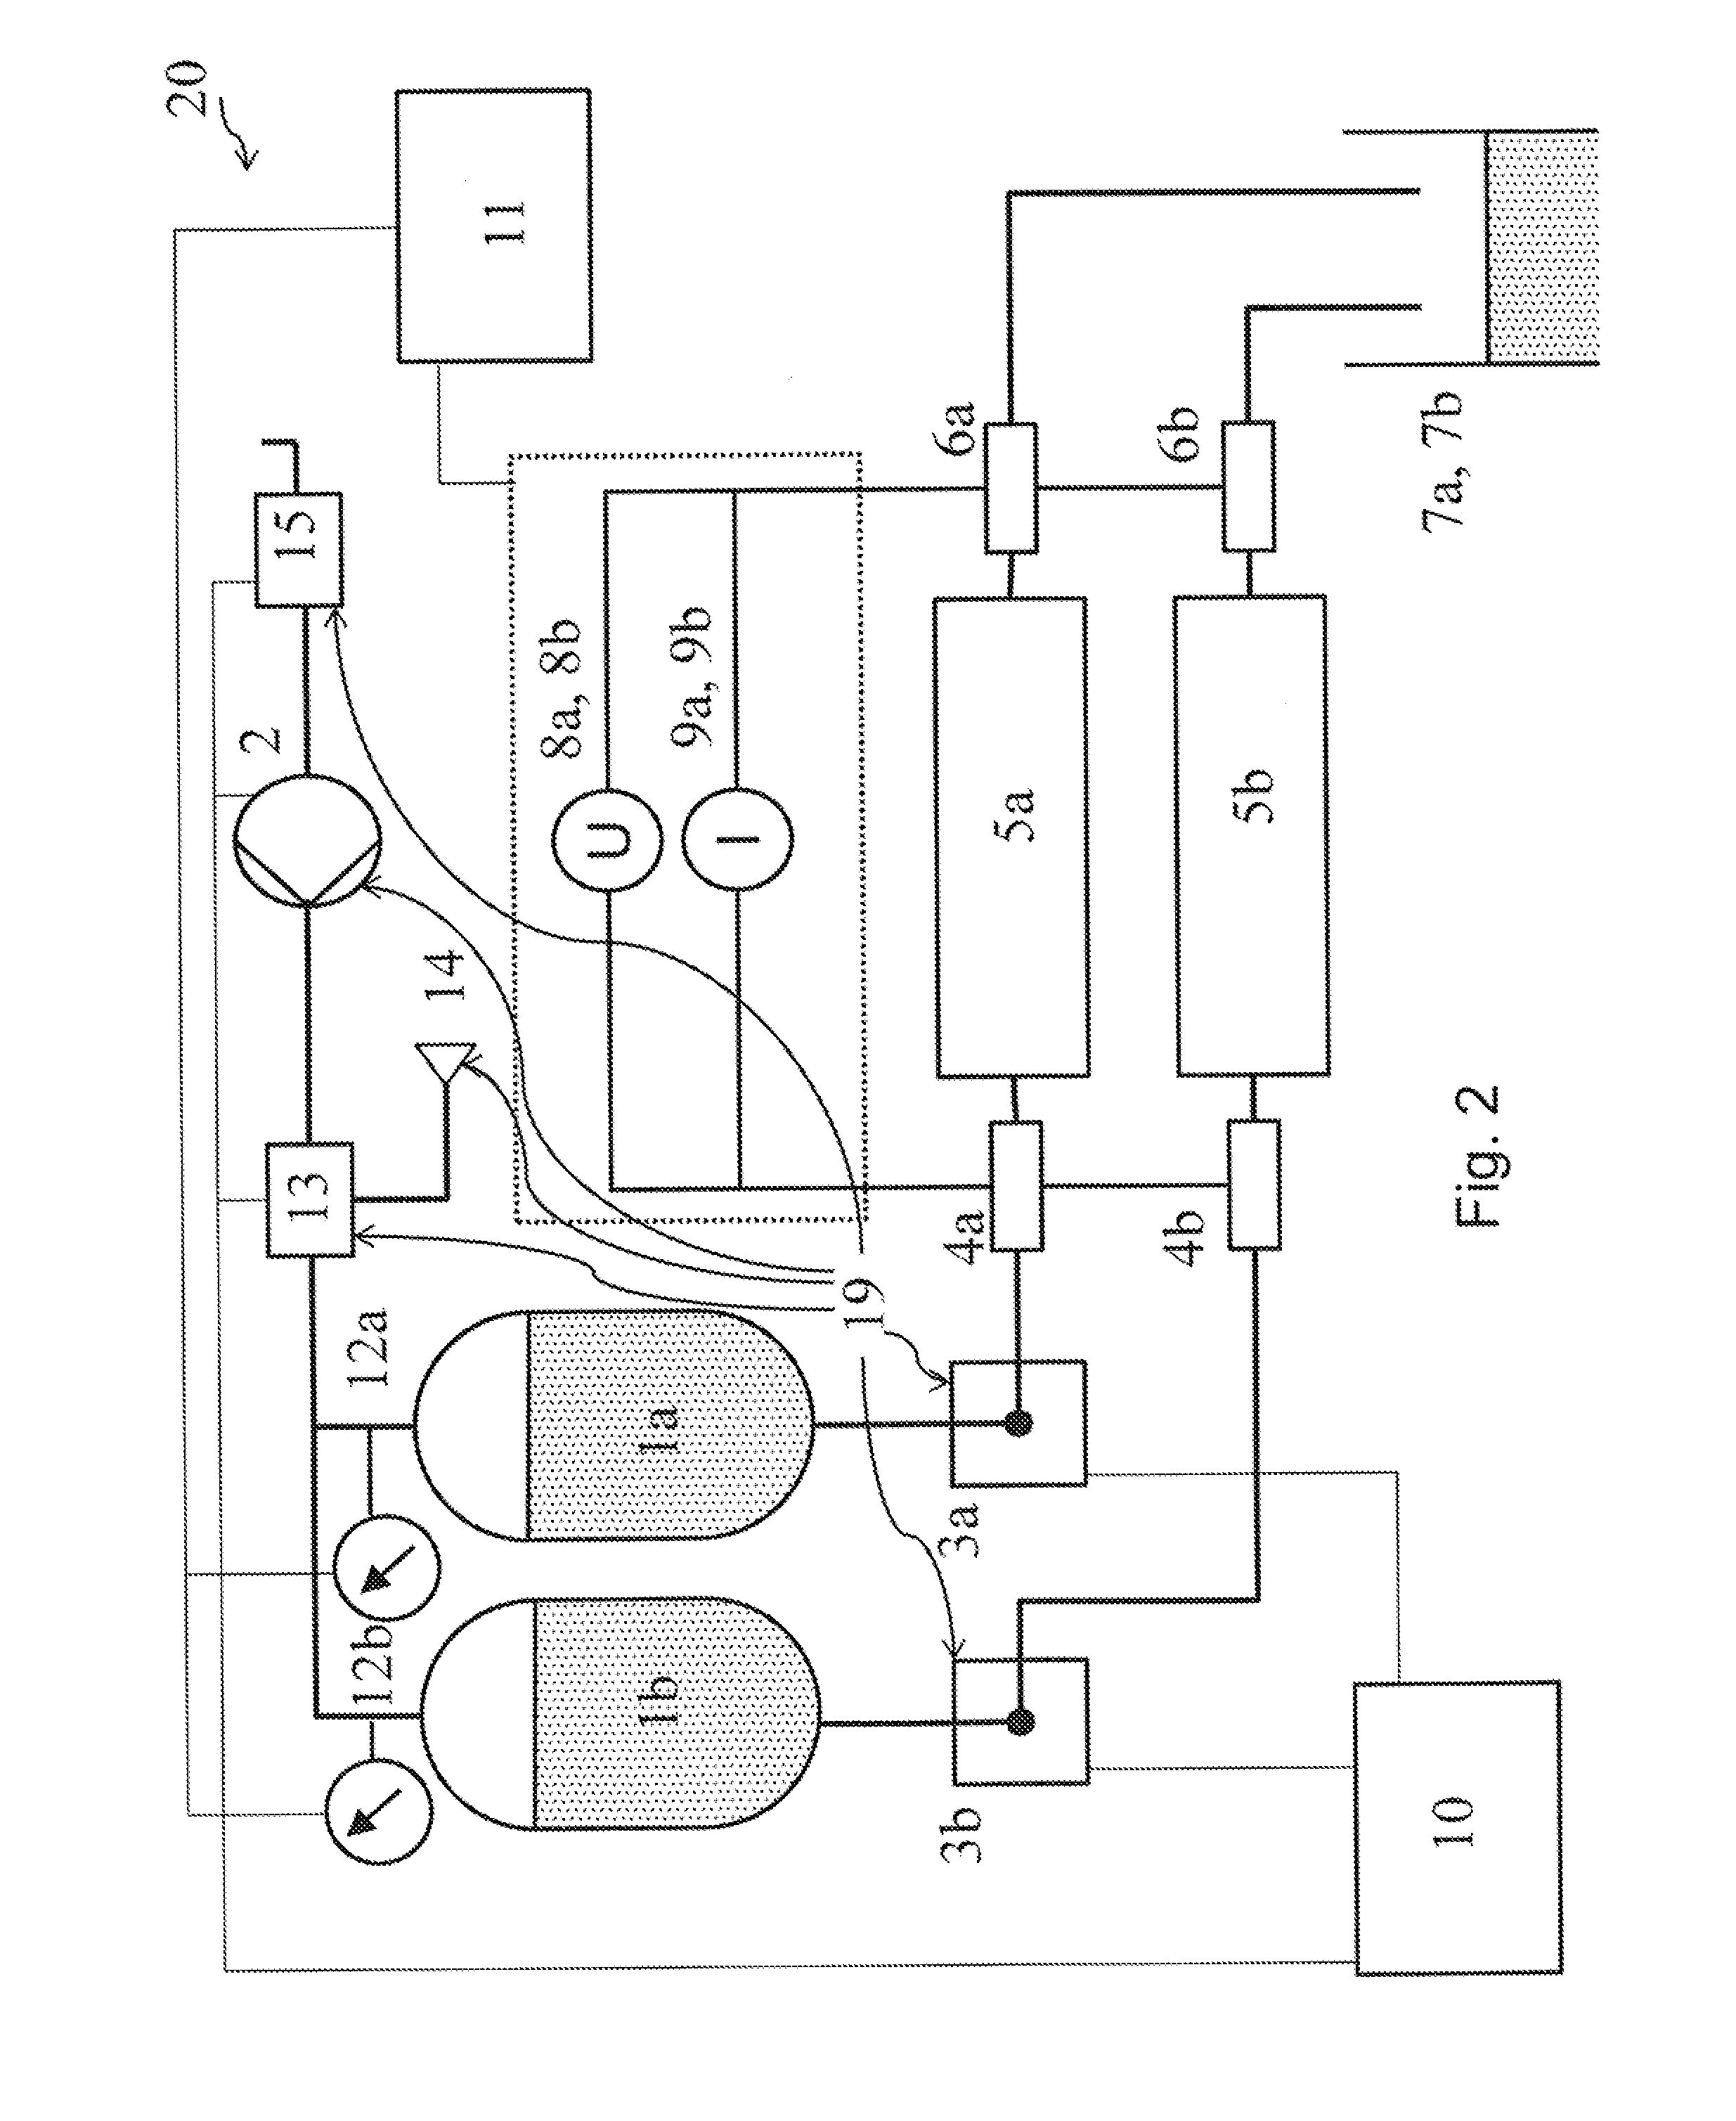 System for Determining the Zeta Potential for Characterizing a Solid/Liquid Interface With Controlled Profile Pressure Loading